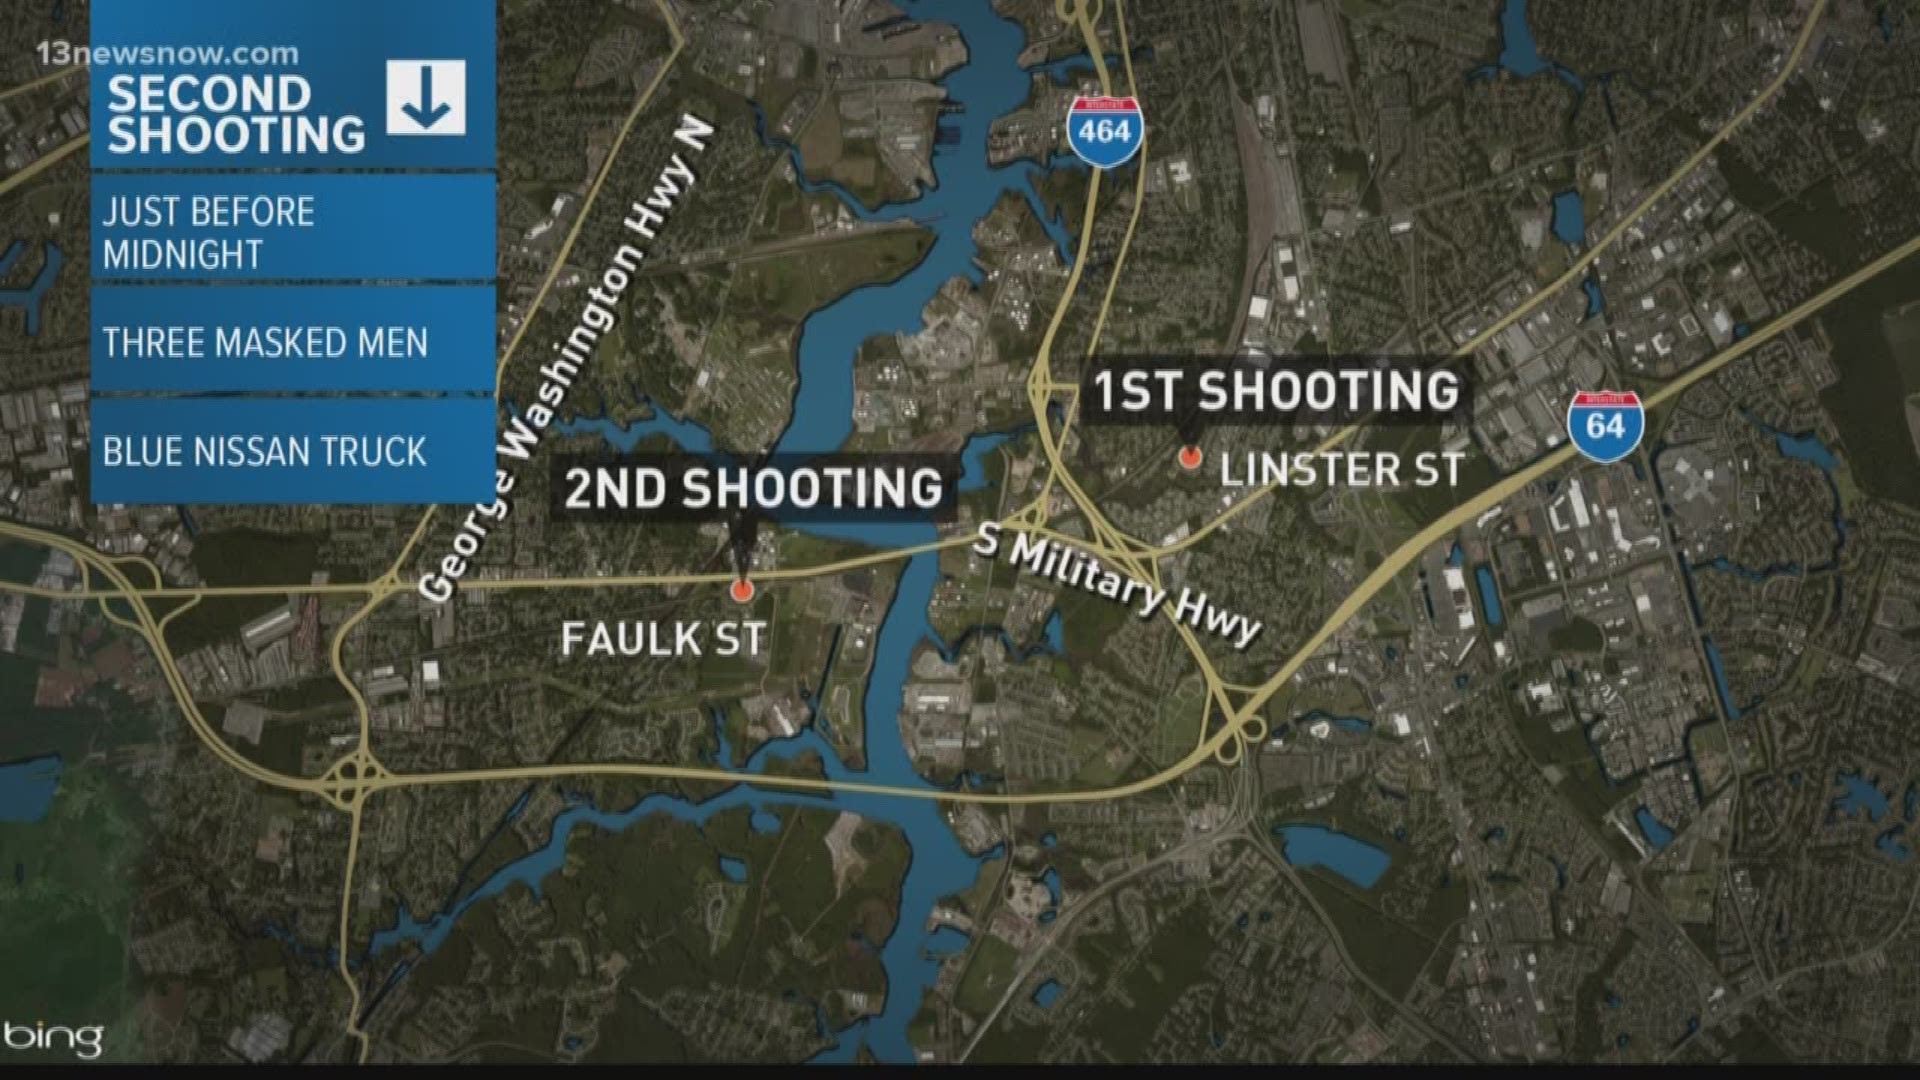 Two separate shootings occurred about 3 miles apart -- with one victim with serious injuries. The other victim is also at the hospital with gunshot wounds.